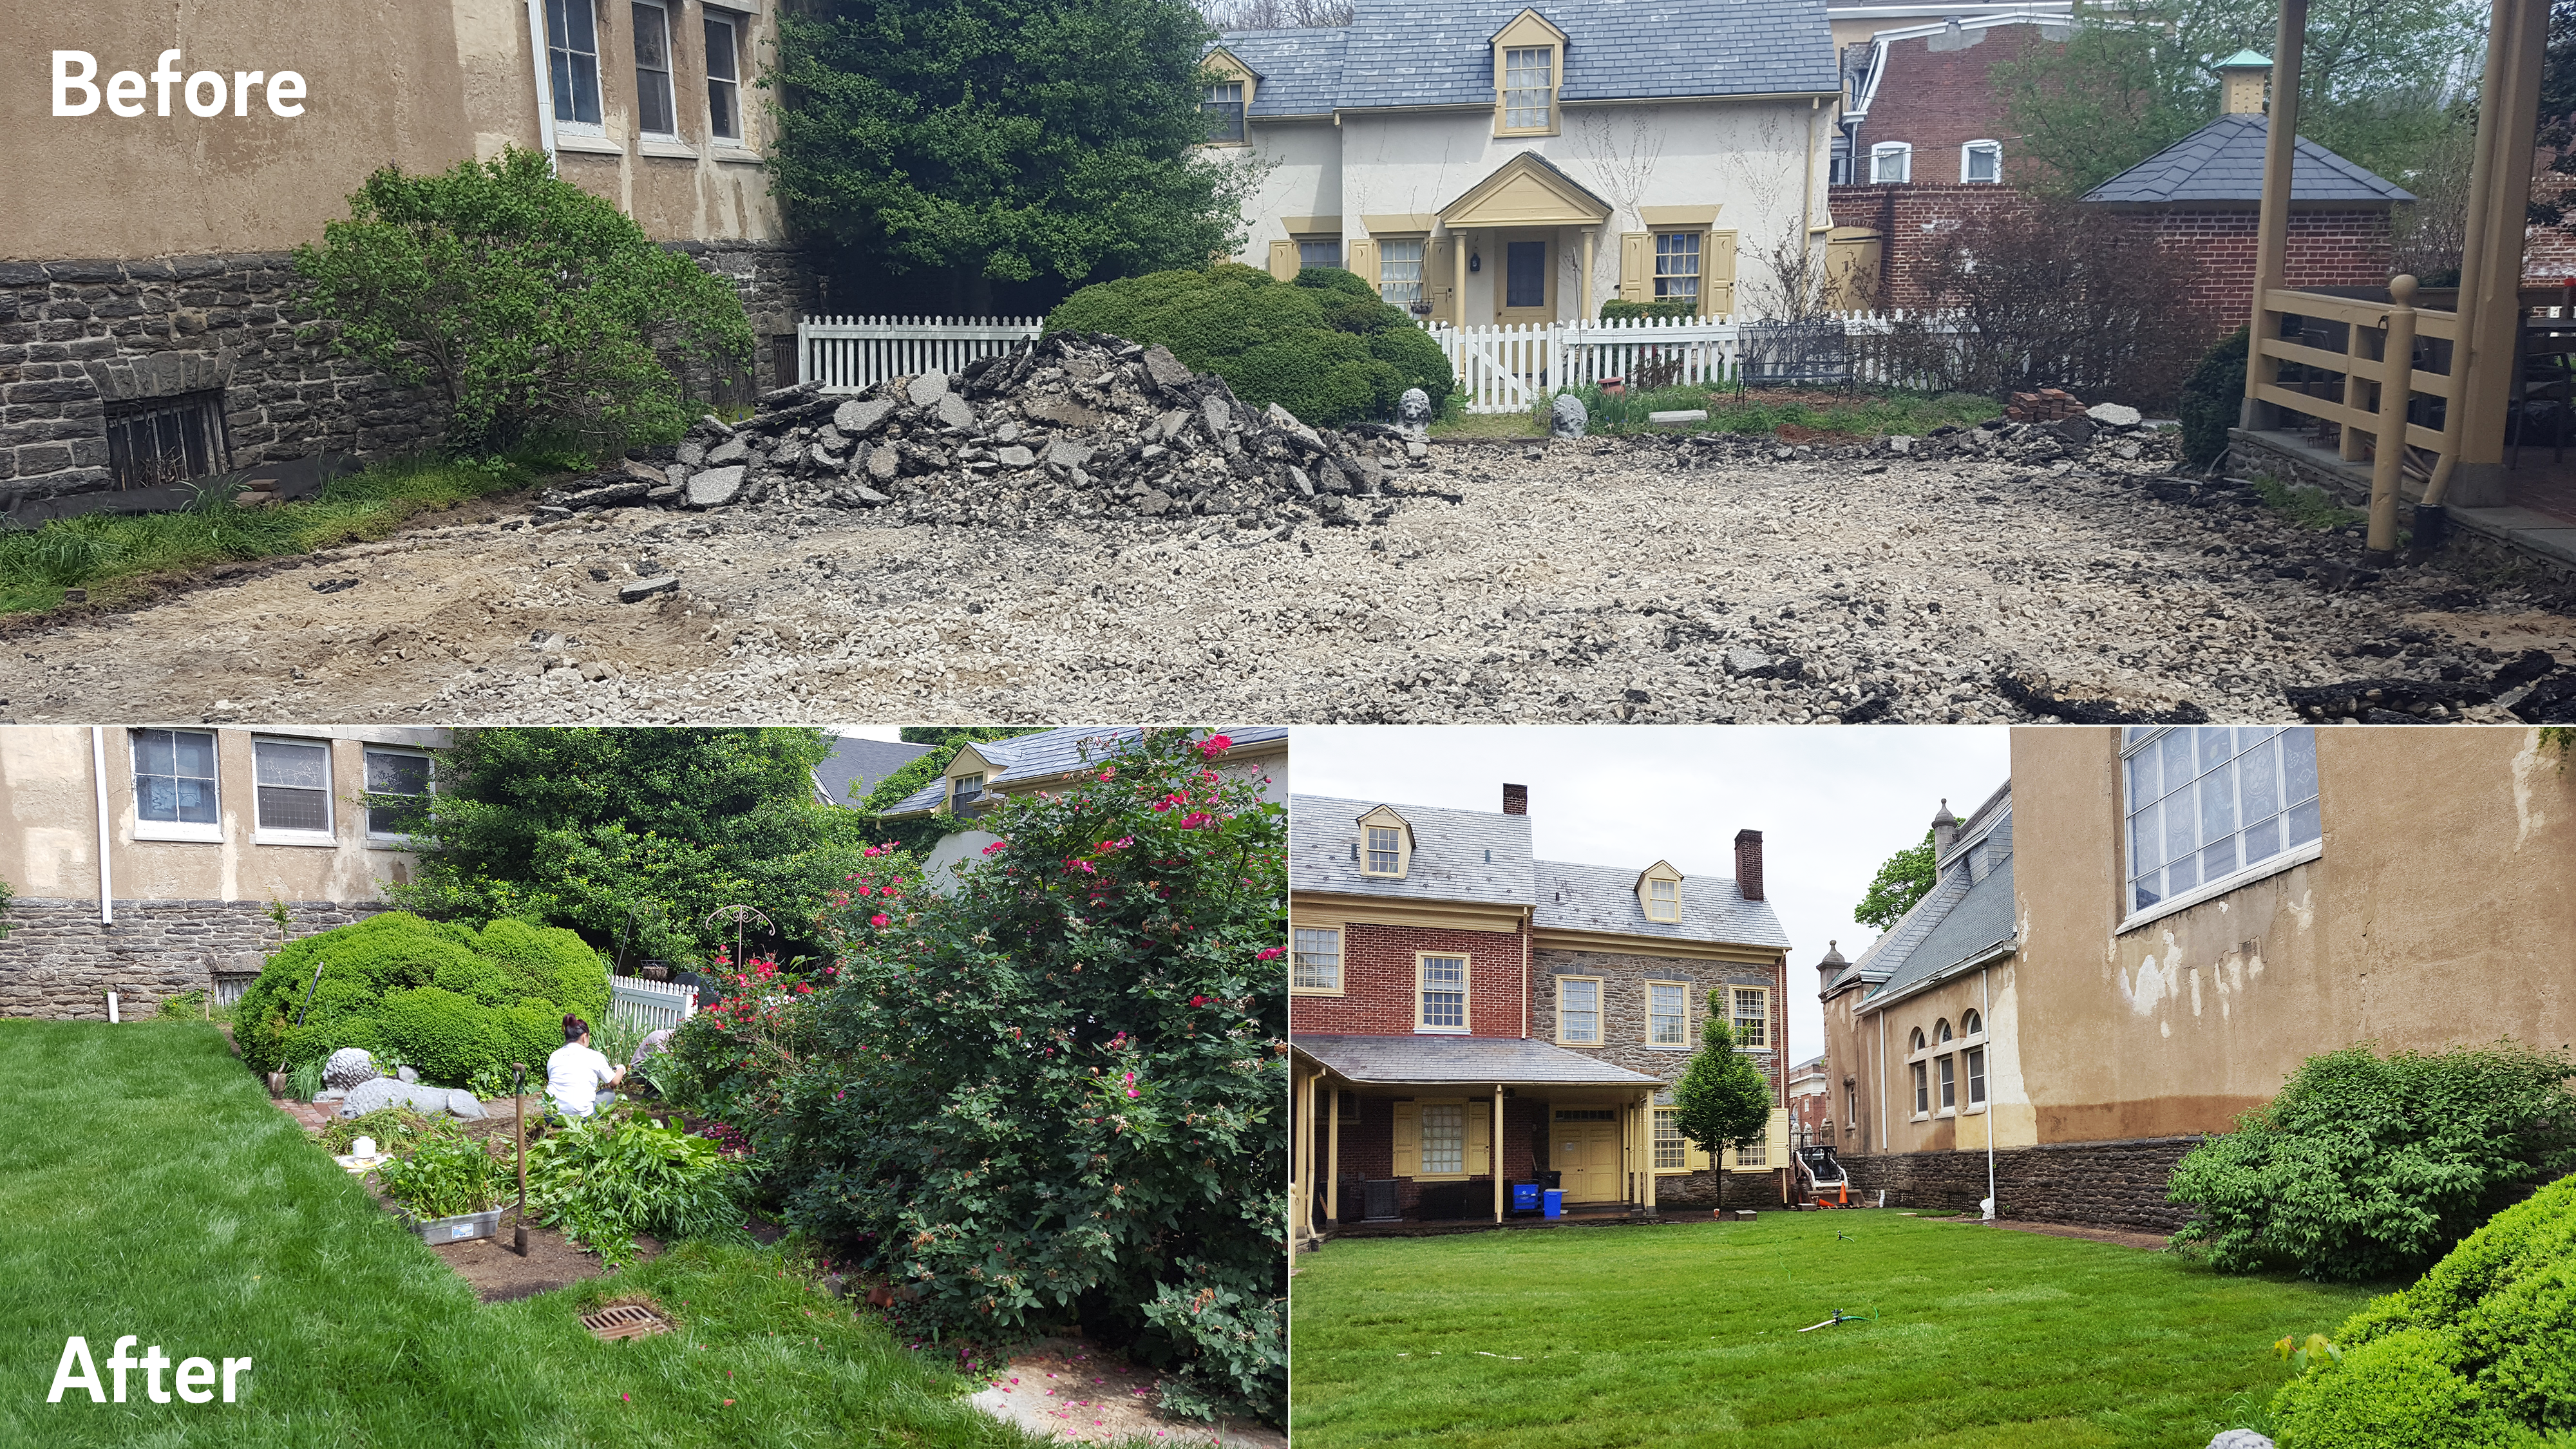 Top: a view of the courtyard area before the upgrade shows broken-up asphalt between charming historic buildings. Bottom Left: volunteers hard at work planting the new rain garden. Bottom Right: a view of the courtyard area after the upgrade shows a luscious green space with grass and natural landscaping replacing the former impervious pavement.